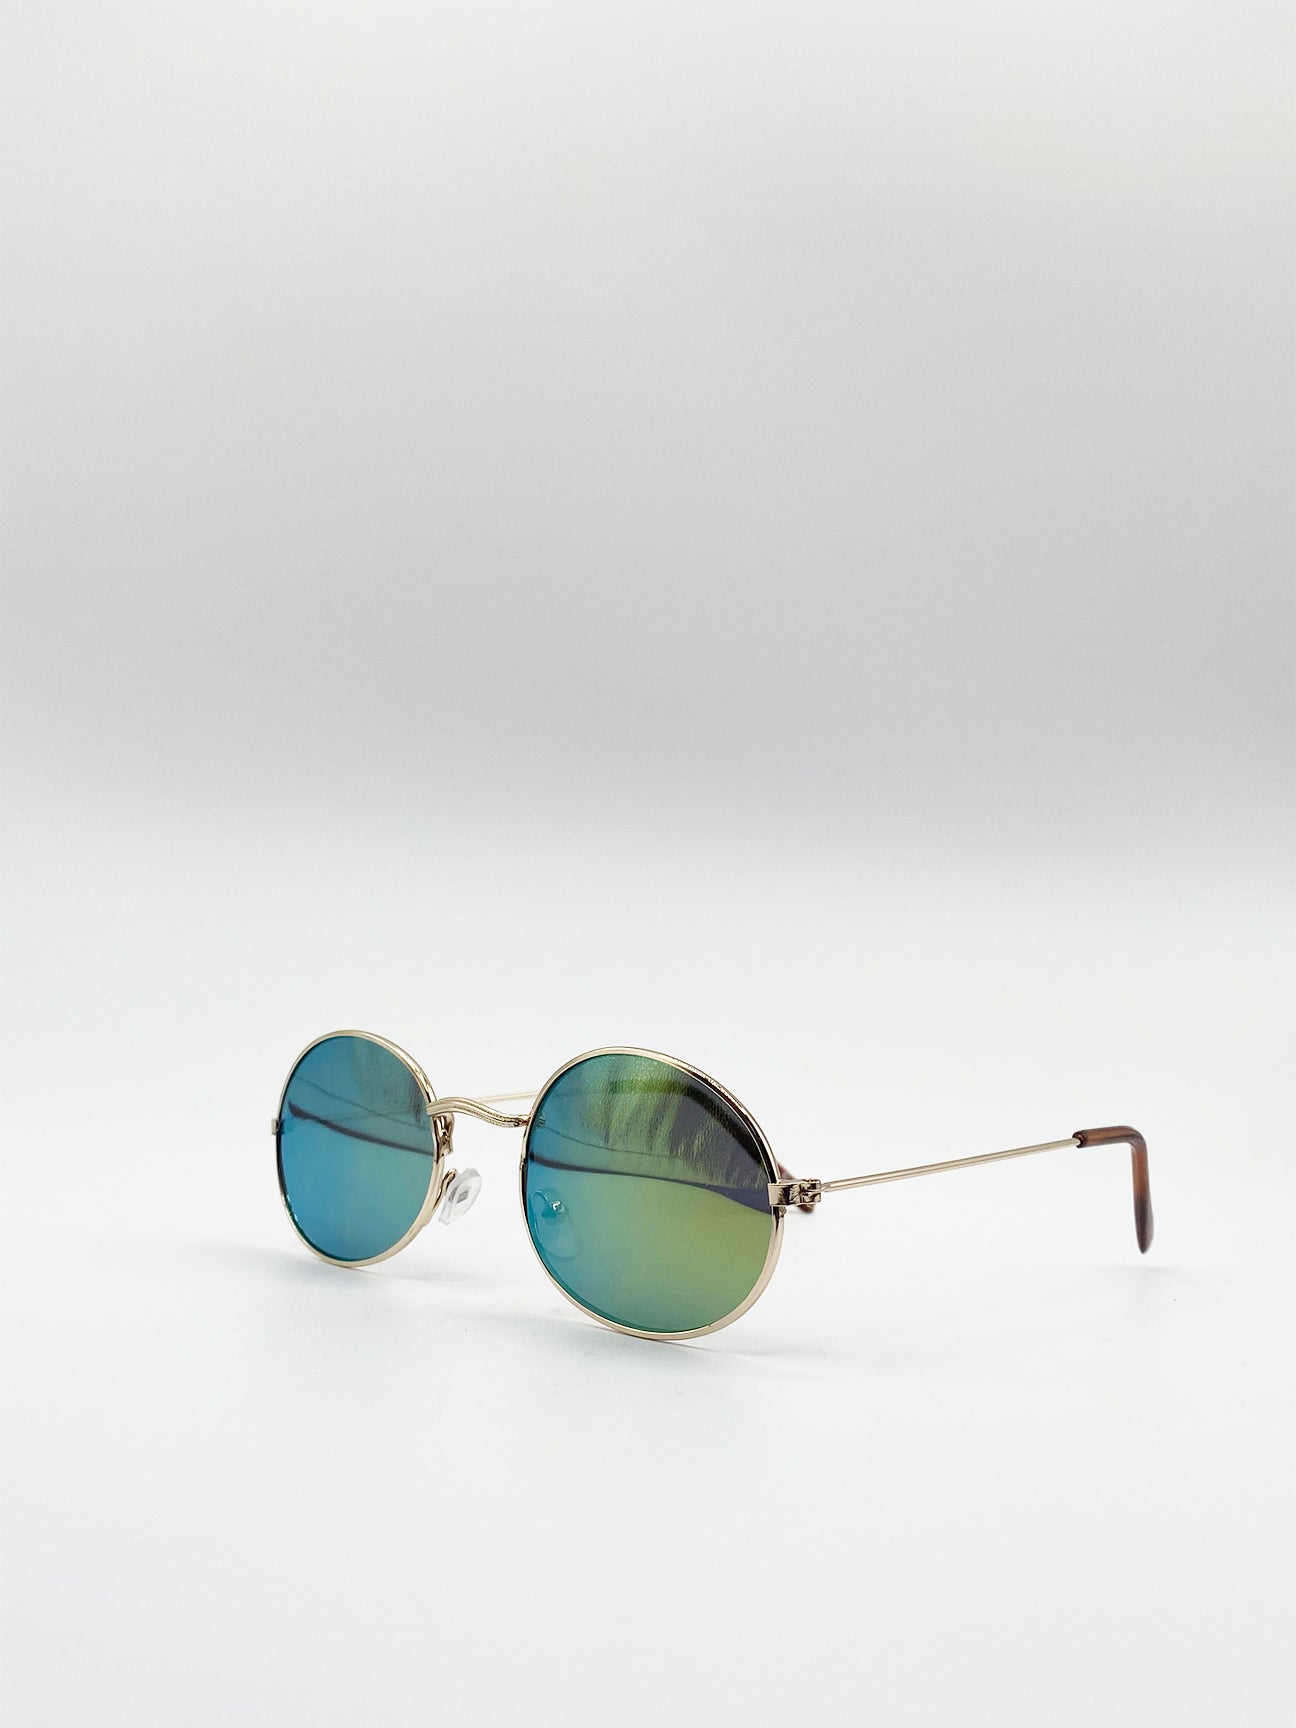 Gold Classic Round Sunglasses with Green Revo Lenses